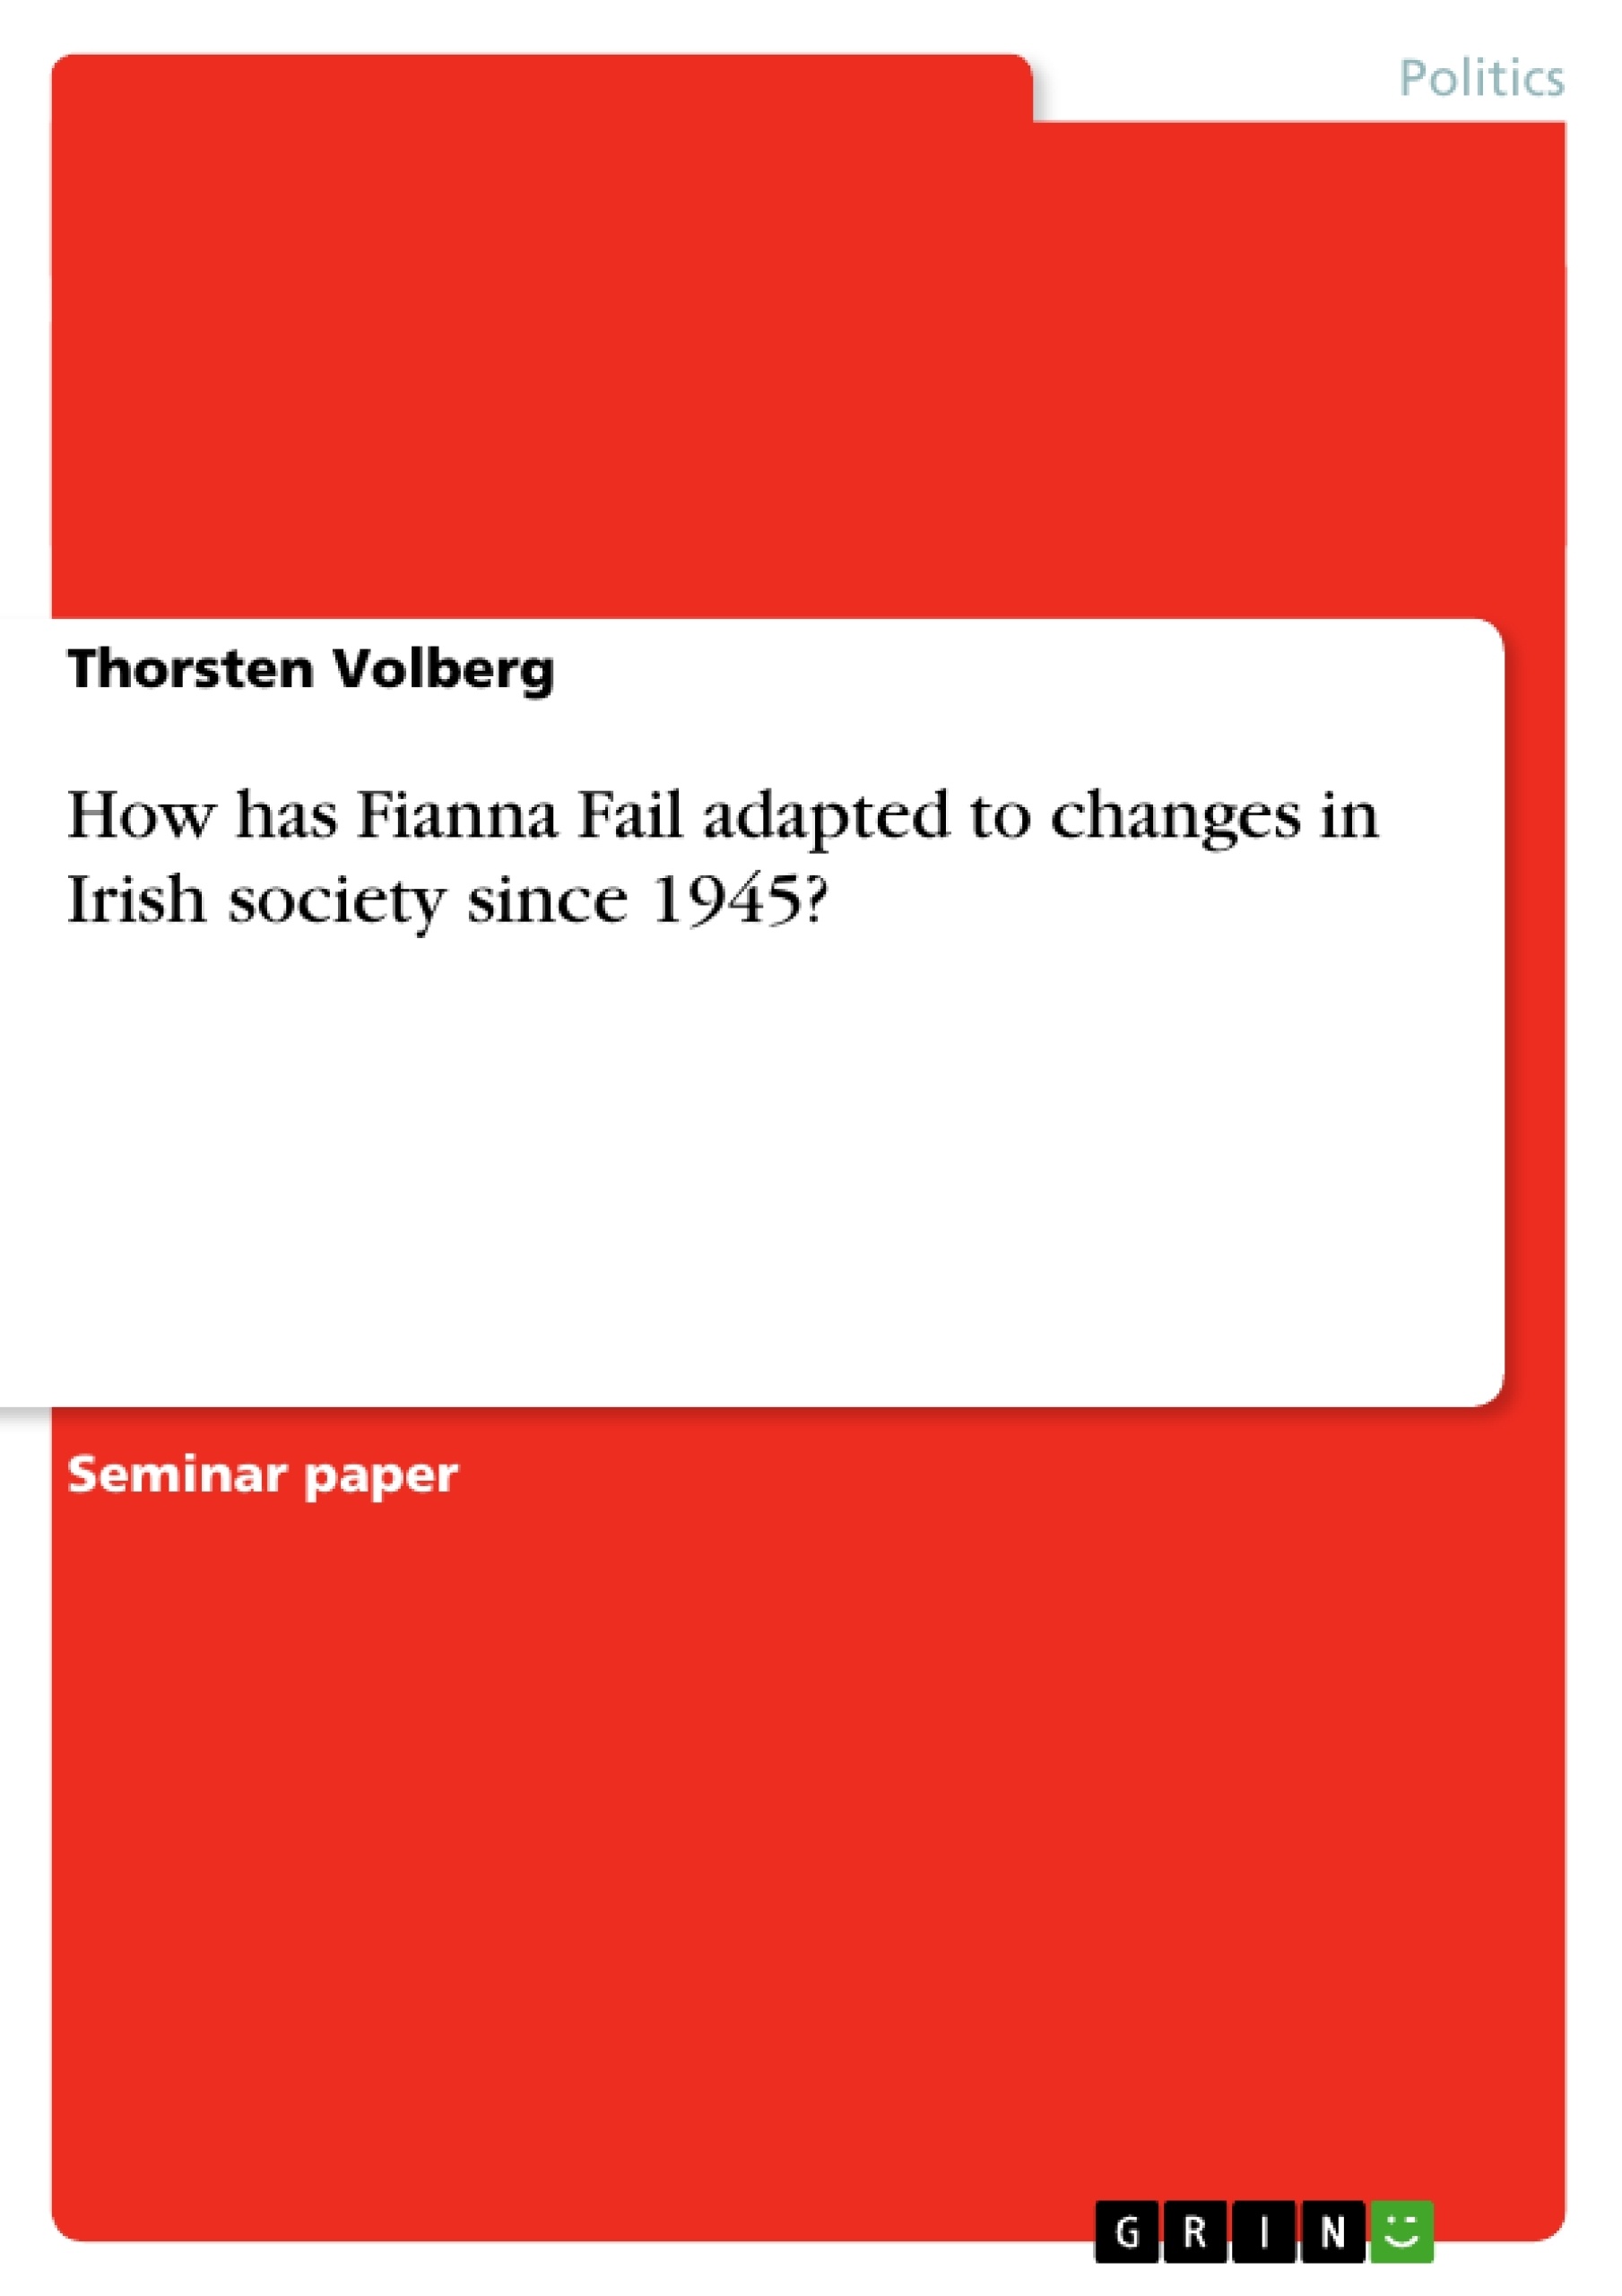 Titre: How has Fianna Fail adapted to changes in Irish society since 1945?